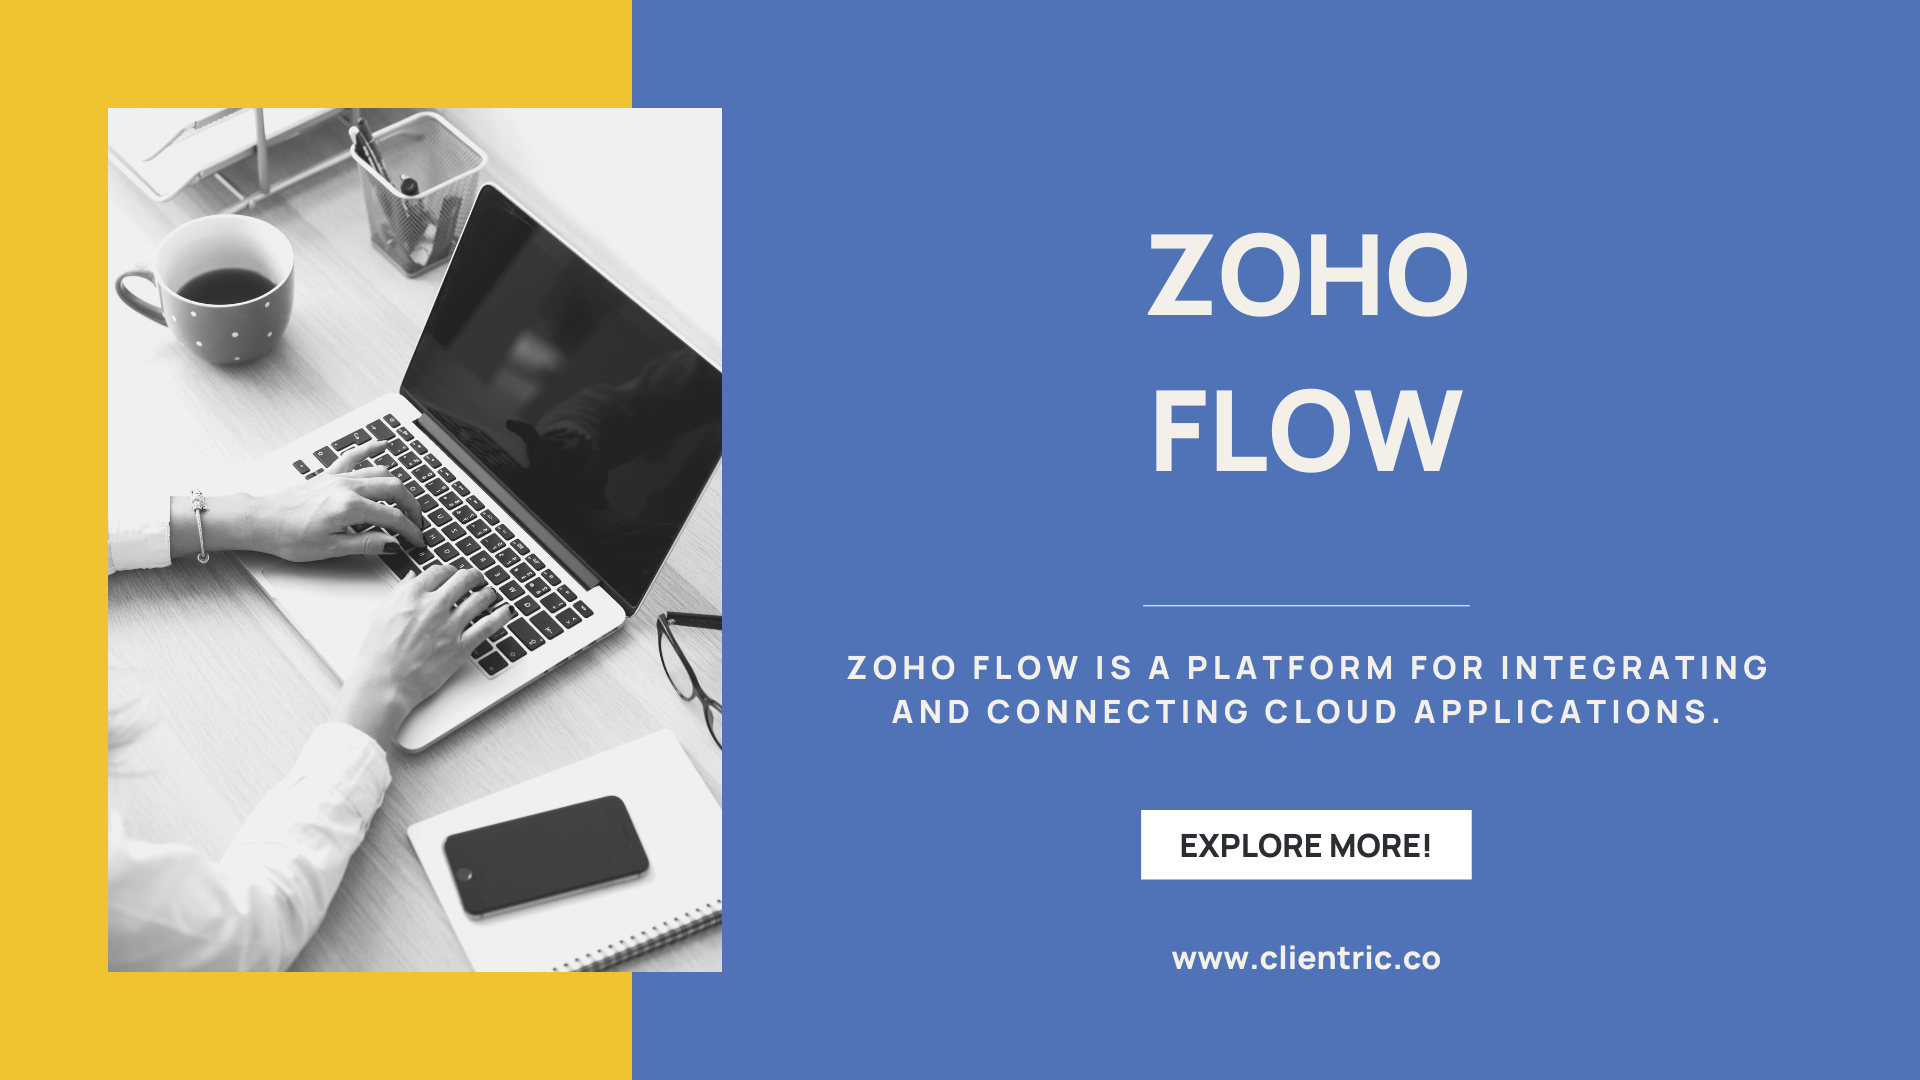 Zoho Flow: A platform for integrating and connecting cloud applications!